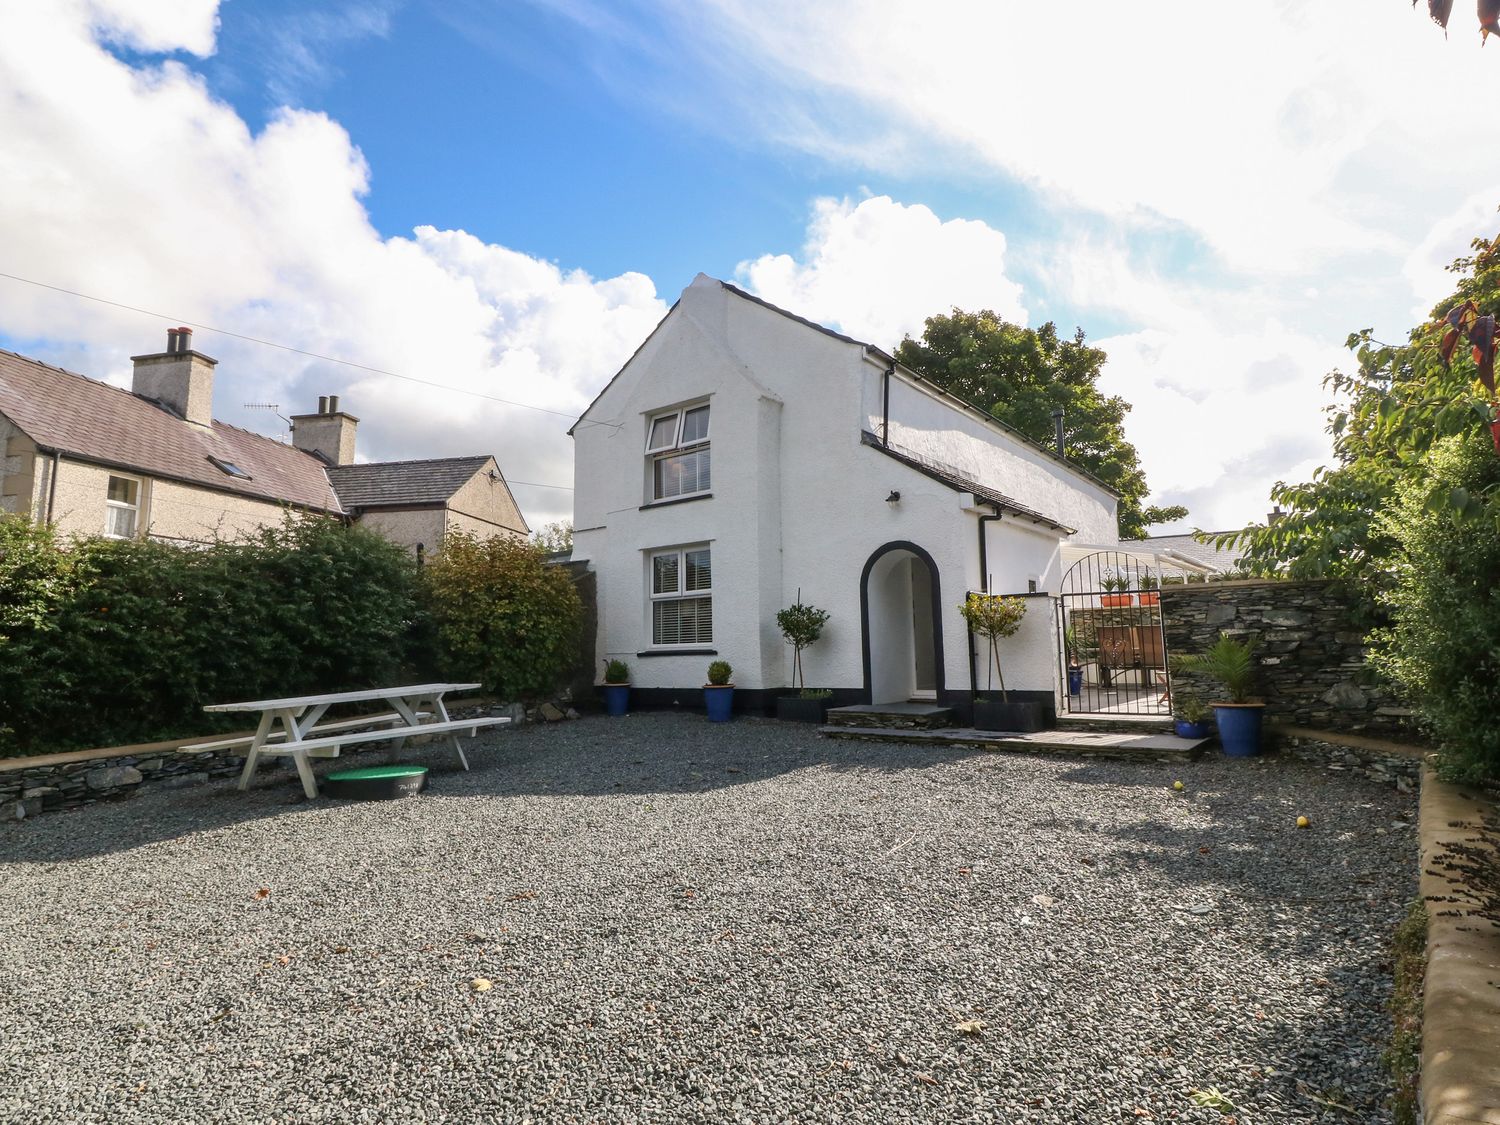 Riverside House - Anglesey - 1008613 - photo 1